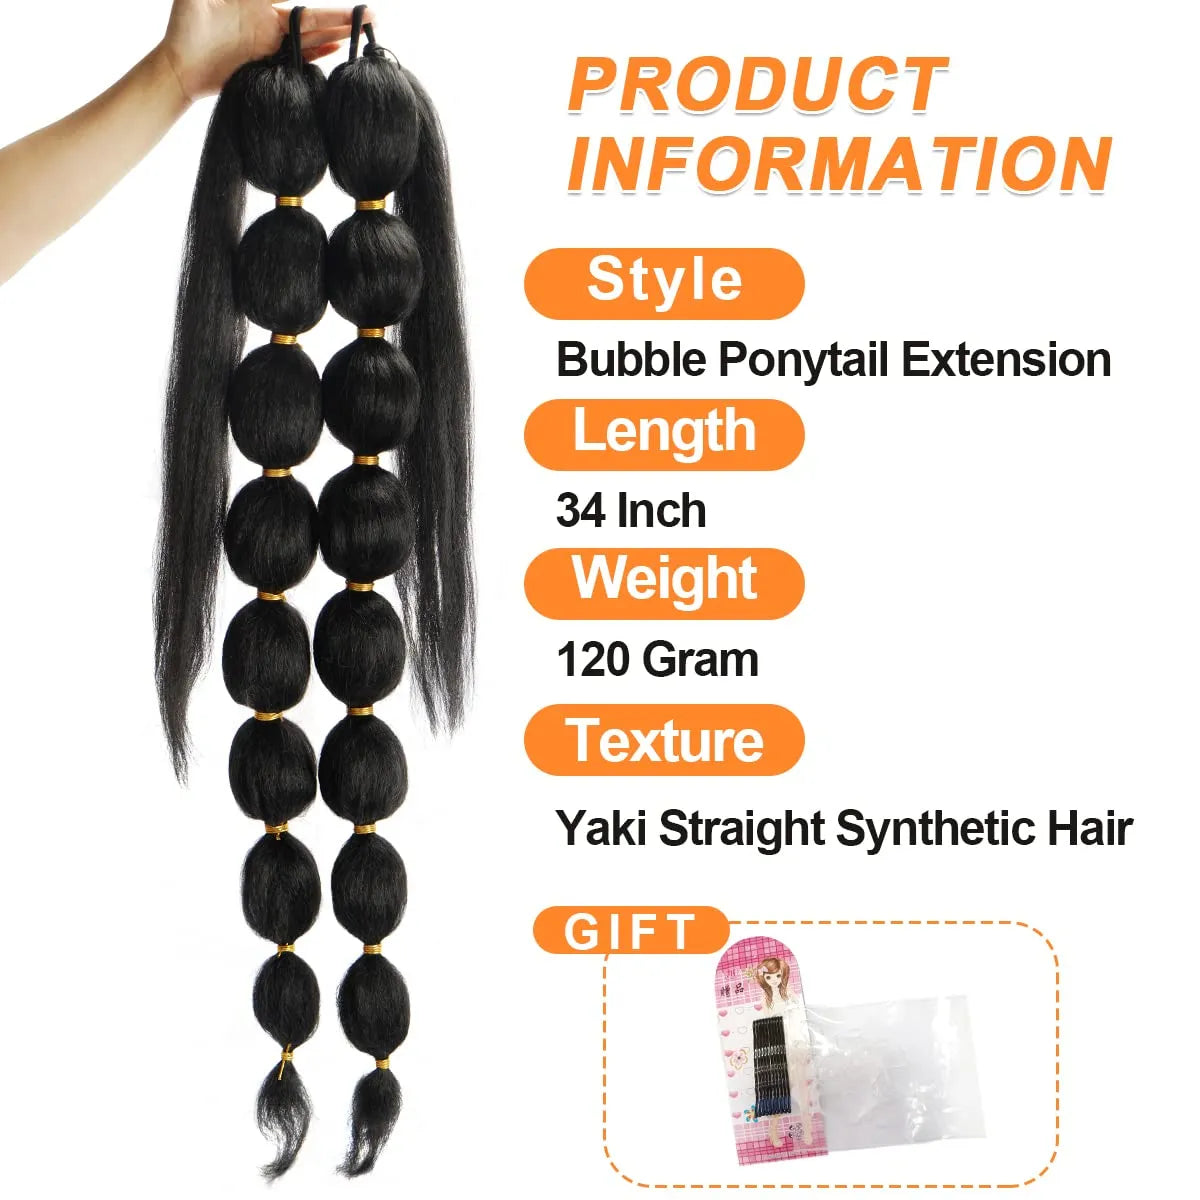 Afro Puff Bubble Ponytail Hair Extension